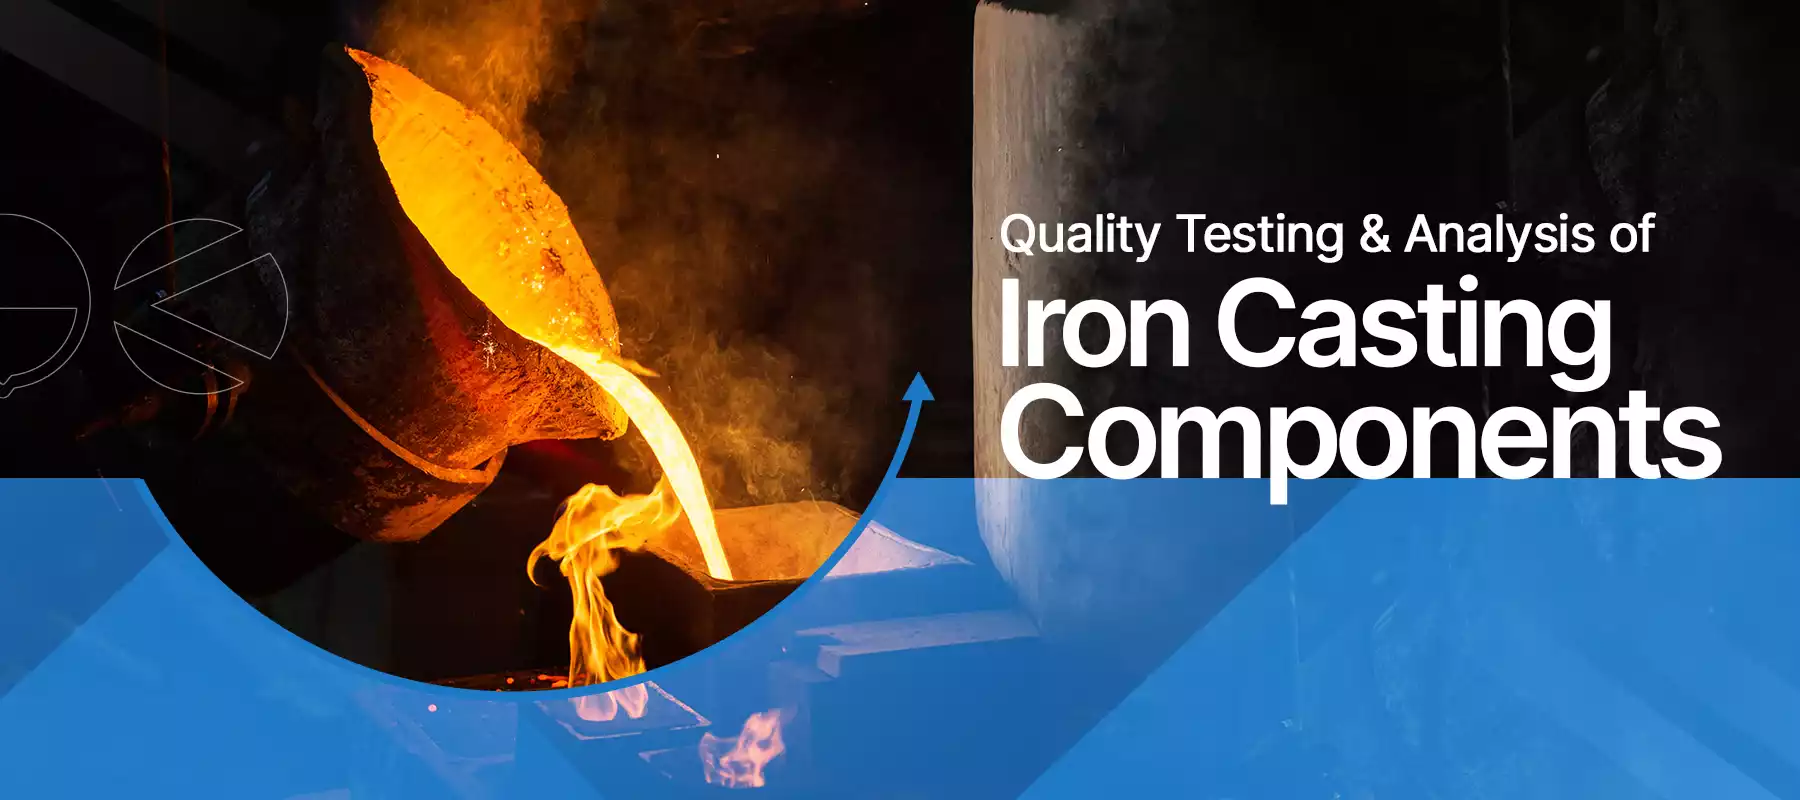 Quality Testing and Analysis of Iron Casting Components